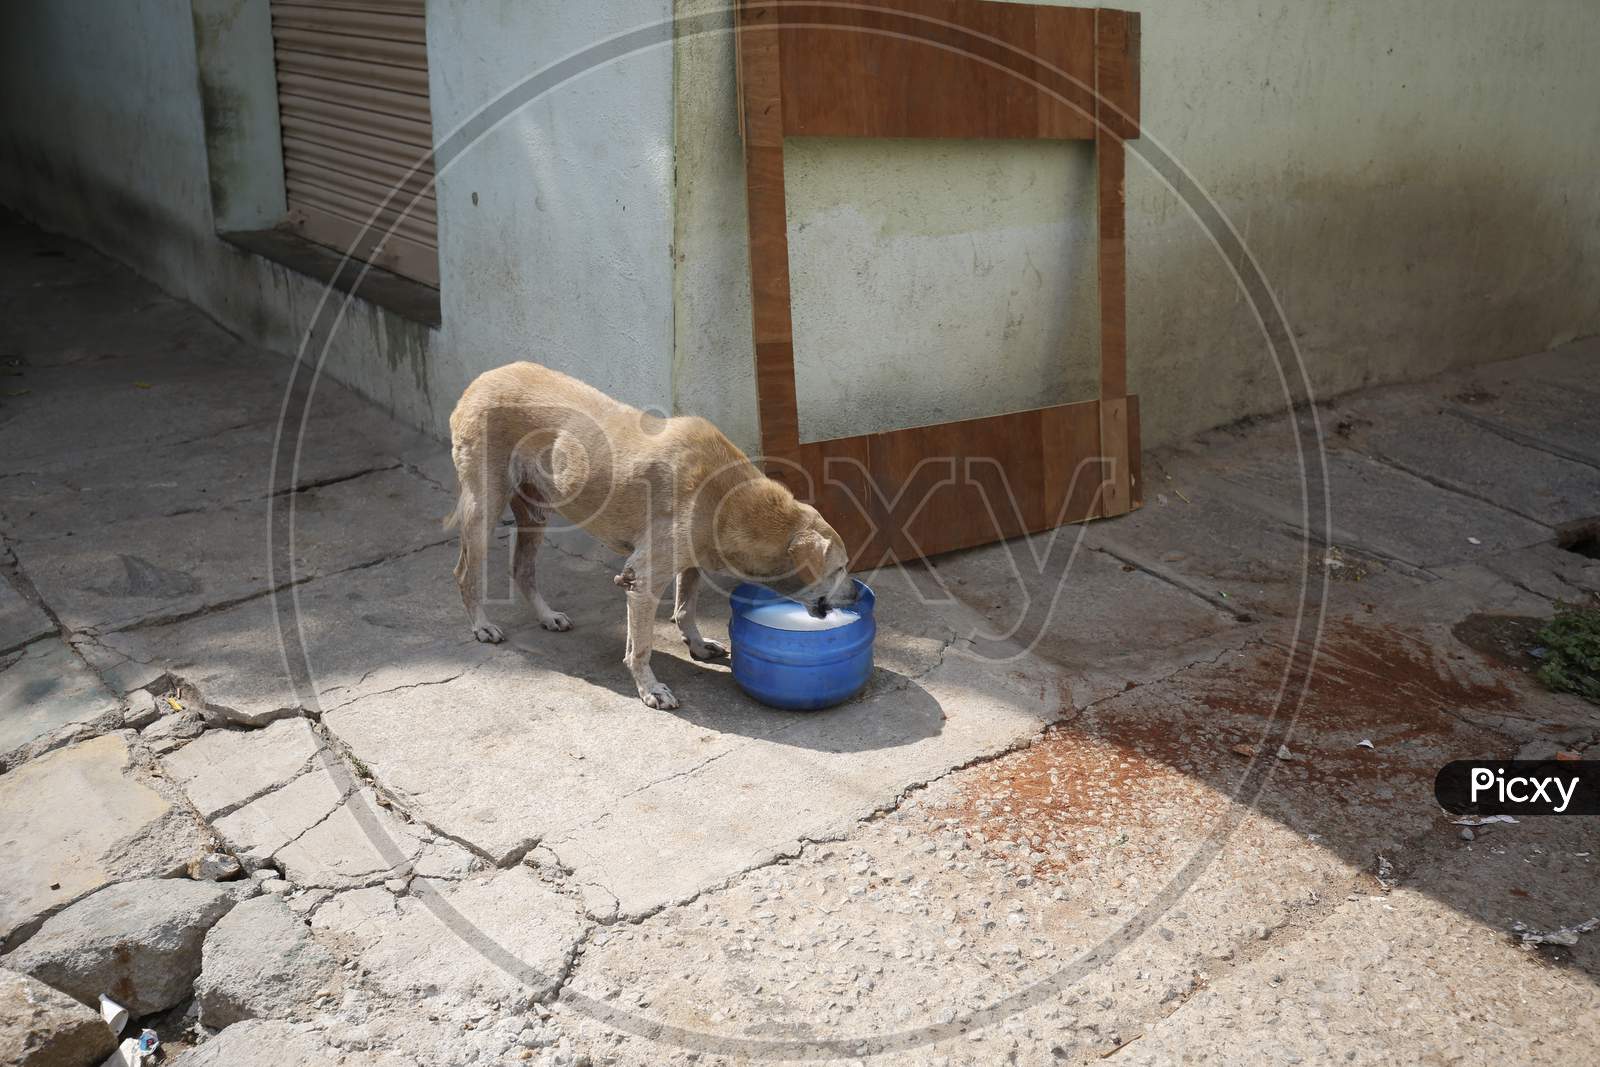 A dog drinks milk kept in a tub during the nationwide lockdown to stop the spread of Coronavirus (COVID-19) in Bangalore, India, May 01, 2020.